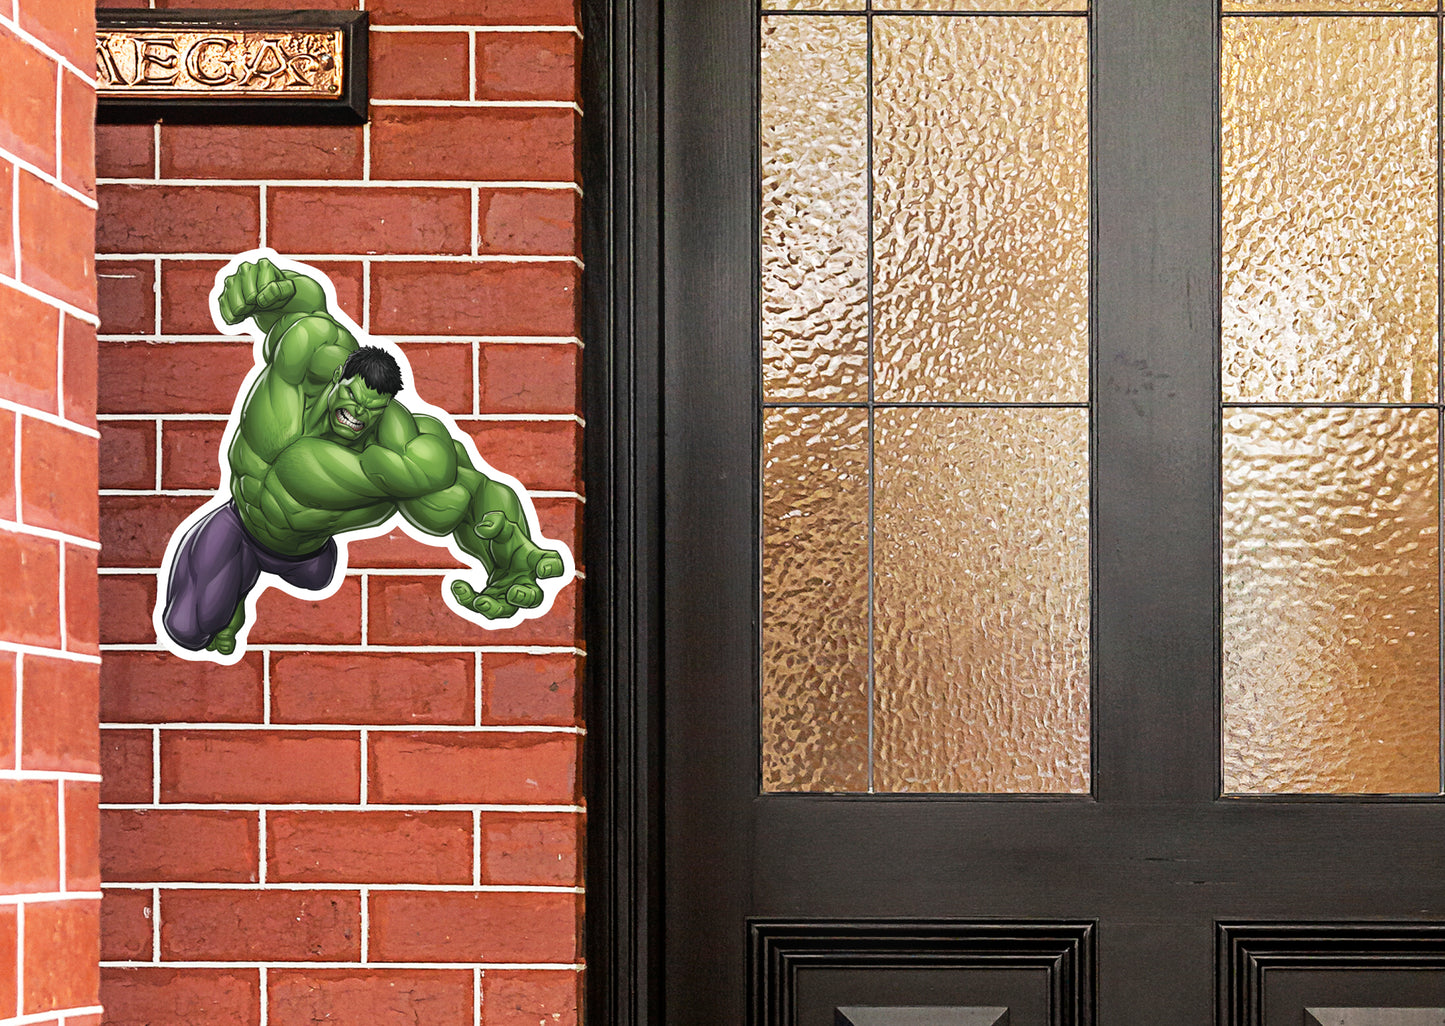 Incredible Hulk: Incredible Hulk Running        - Officially Licensed Marvel    Outdoor Graphic